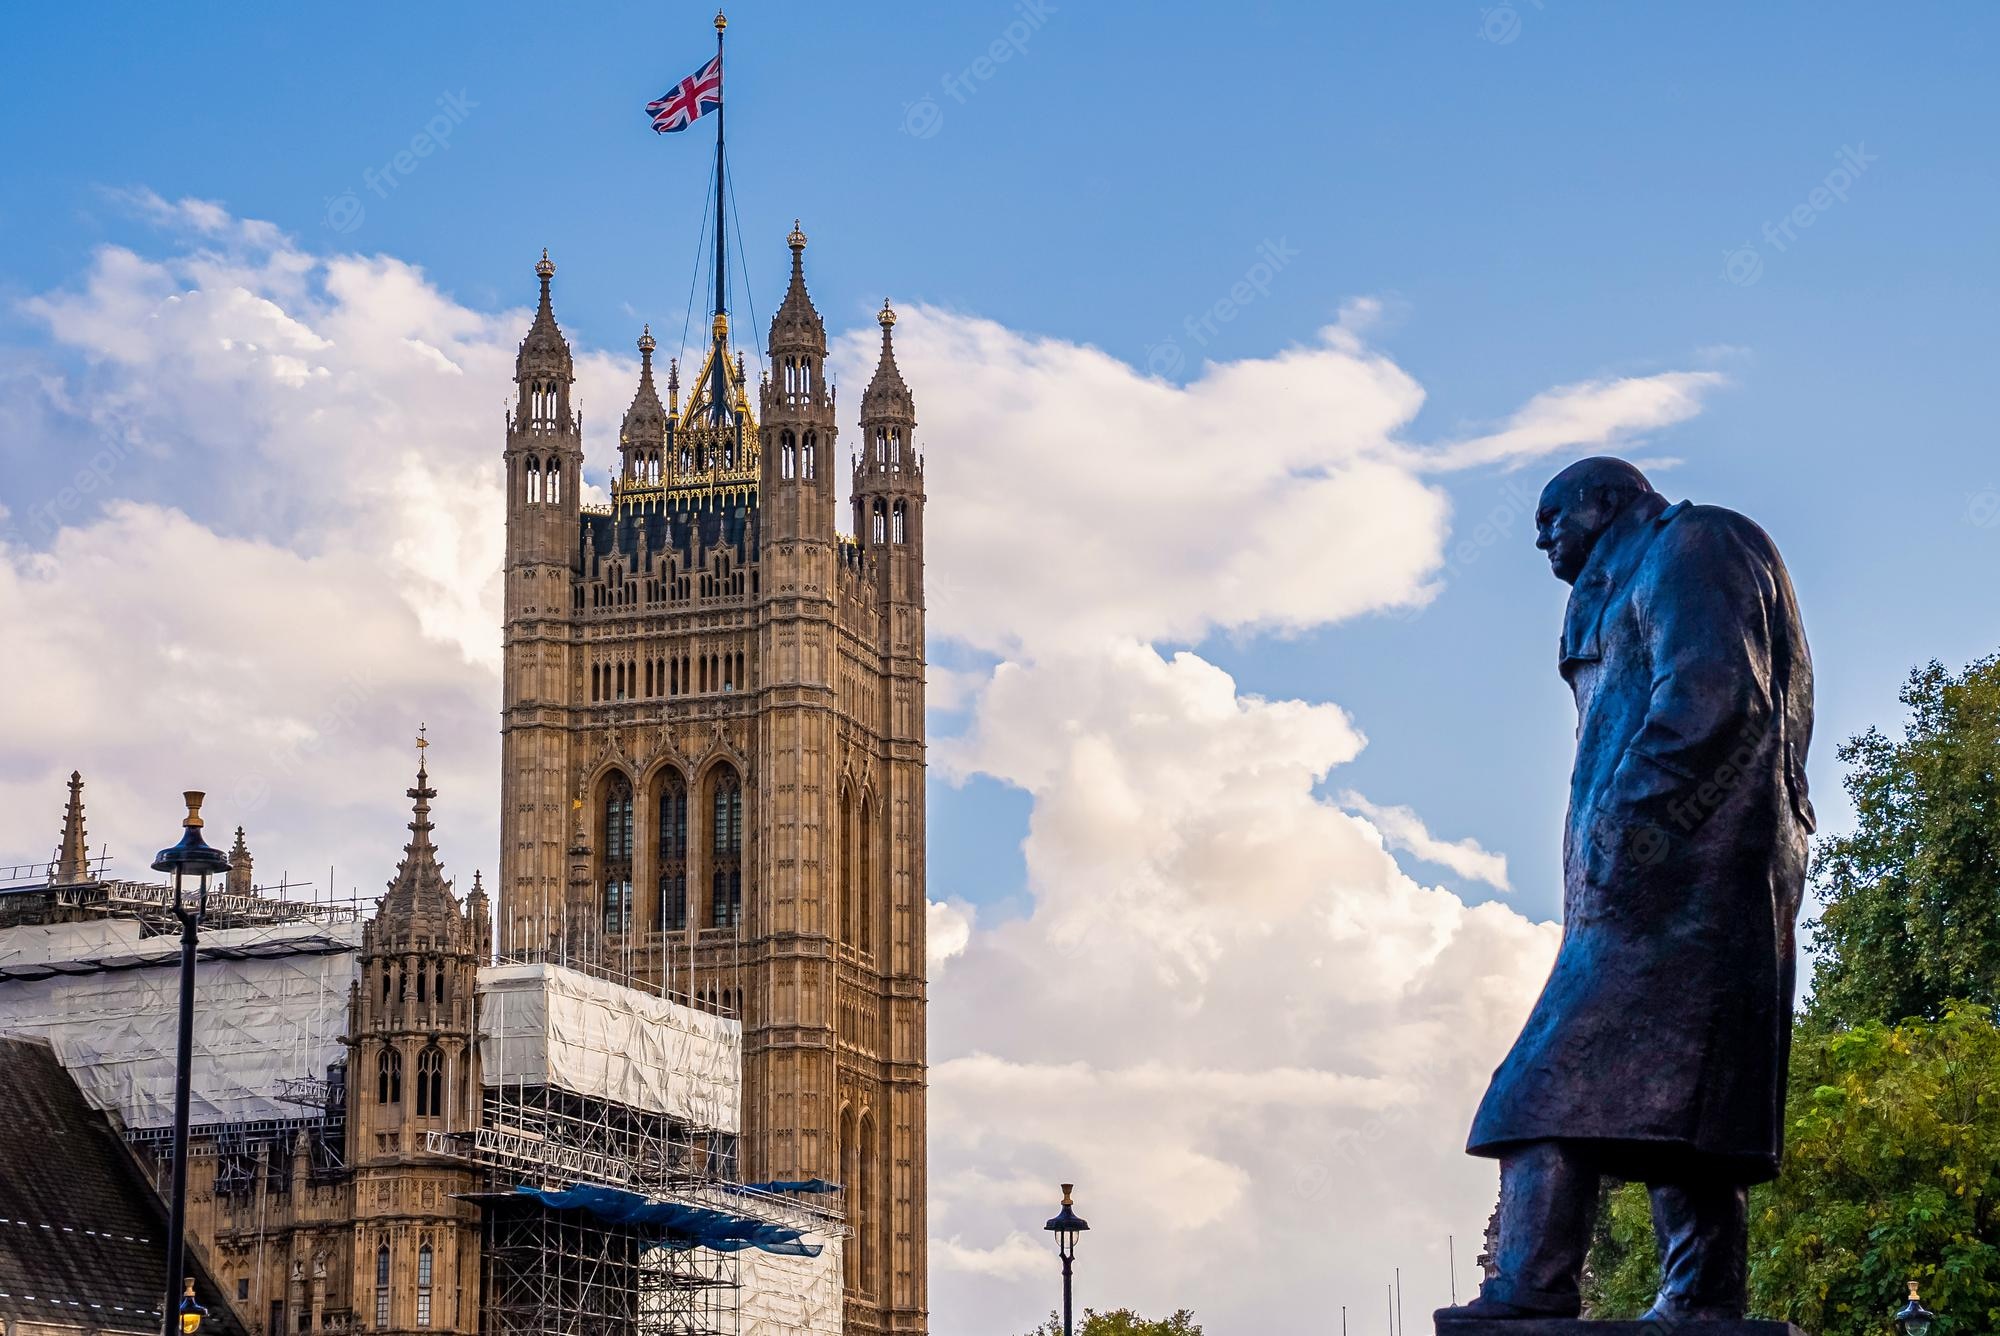 Premium Photo. Statue of sir winston churchill facing the houses of parliament in london